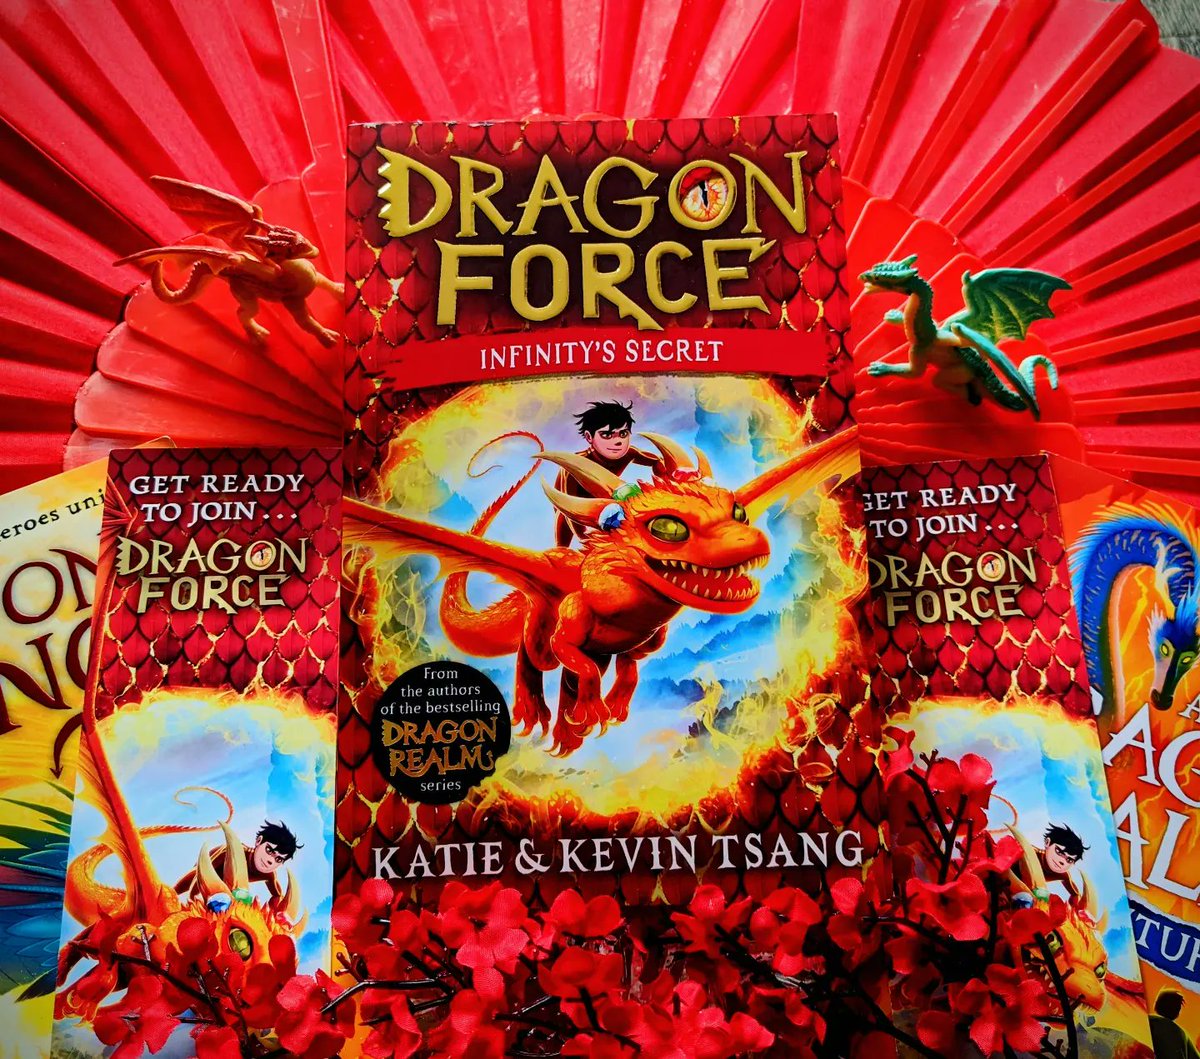 Come and get your copy of the brand new 'Dragon Force: Infinity's Secret' signed and dedicated by the authors Katie and Kevin Tsang! They will also be signing Space Blasters: Suzie and the Comet of Chaos! Thursday 14th September 1pm in store 🔥🔥🔥 @kwebberwrites @kevtsang